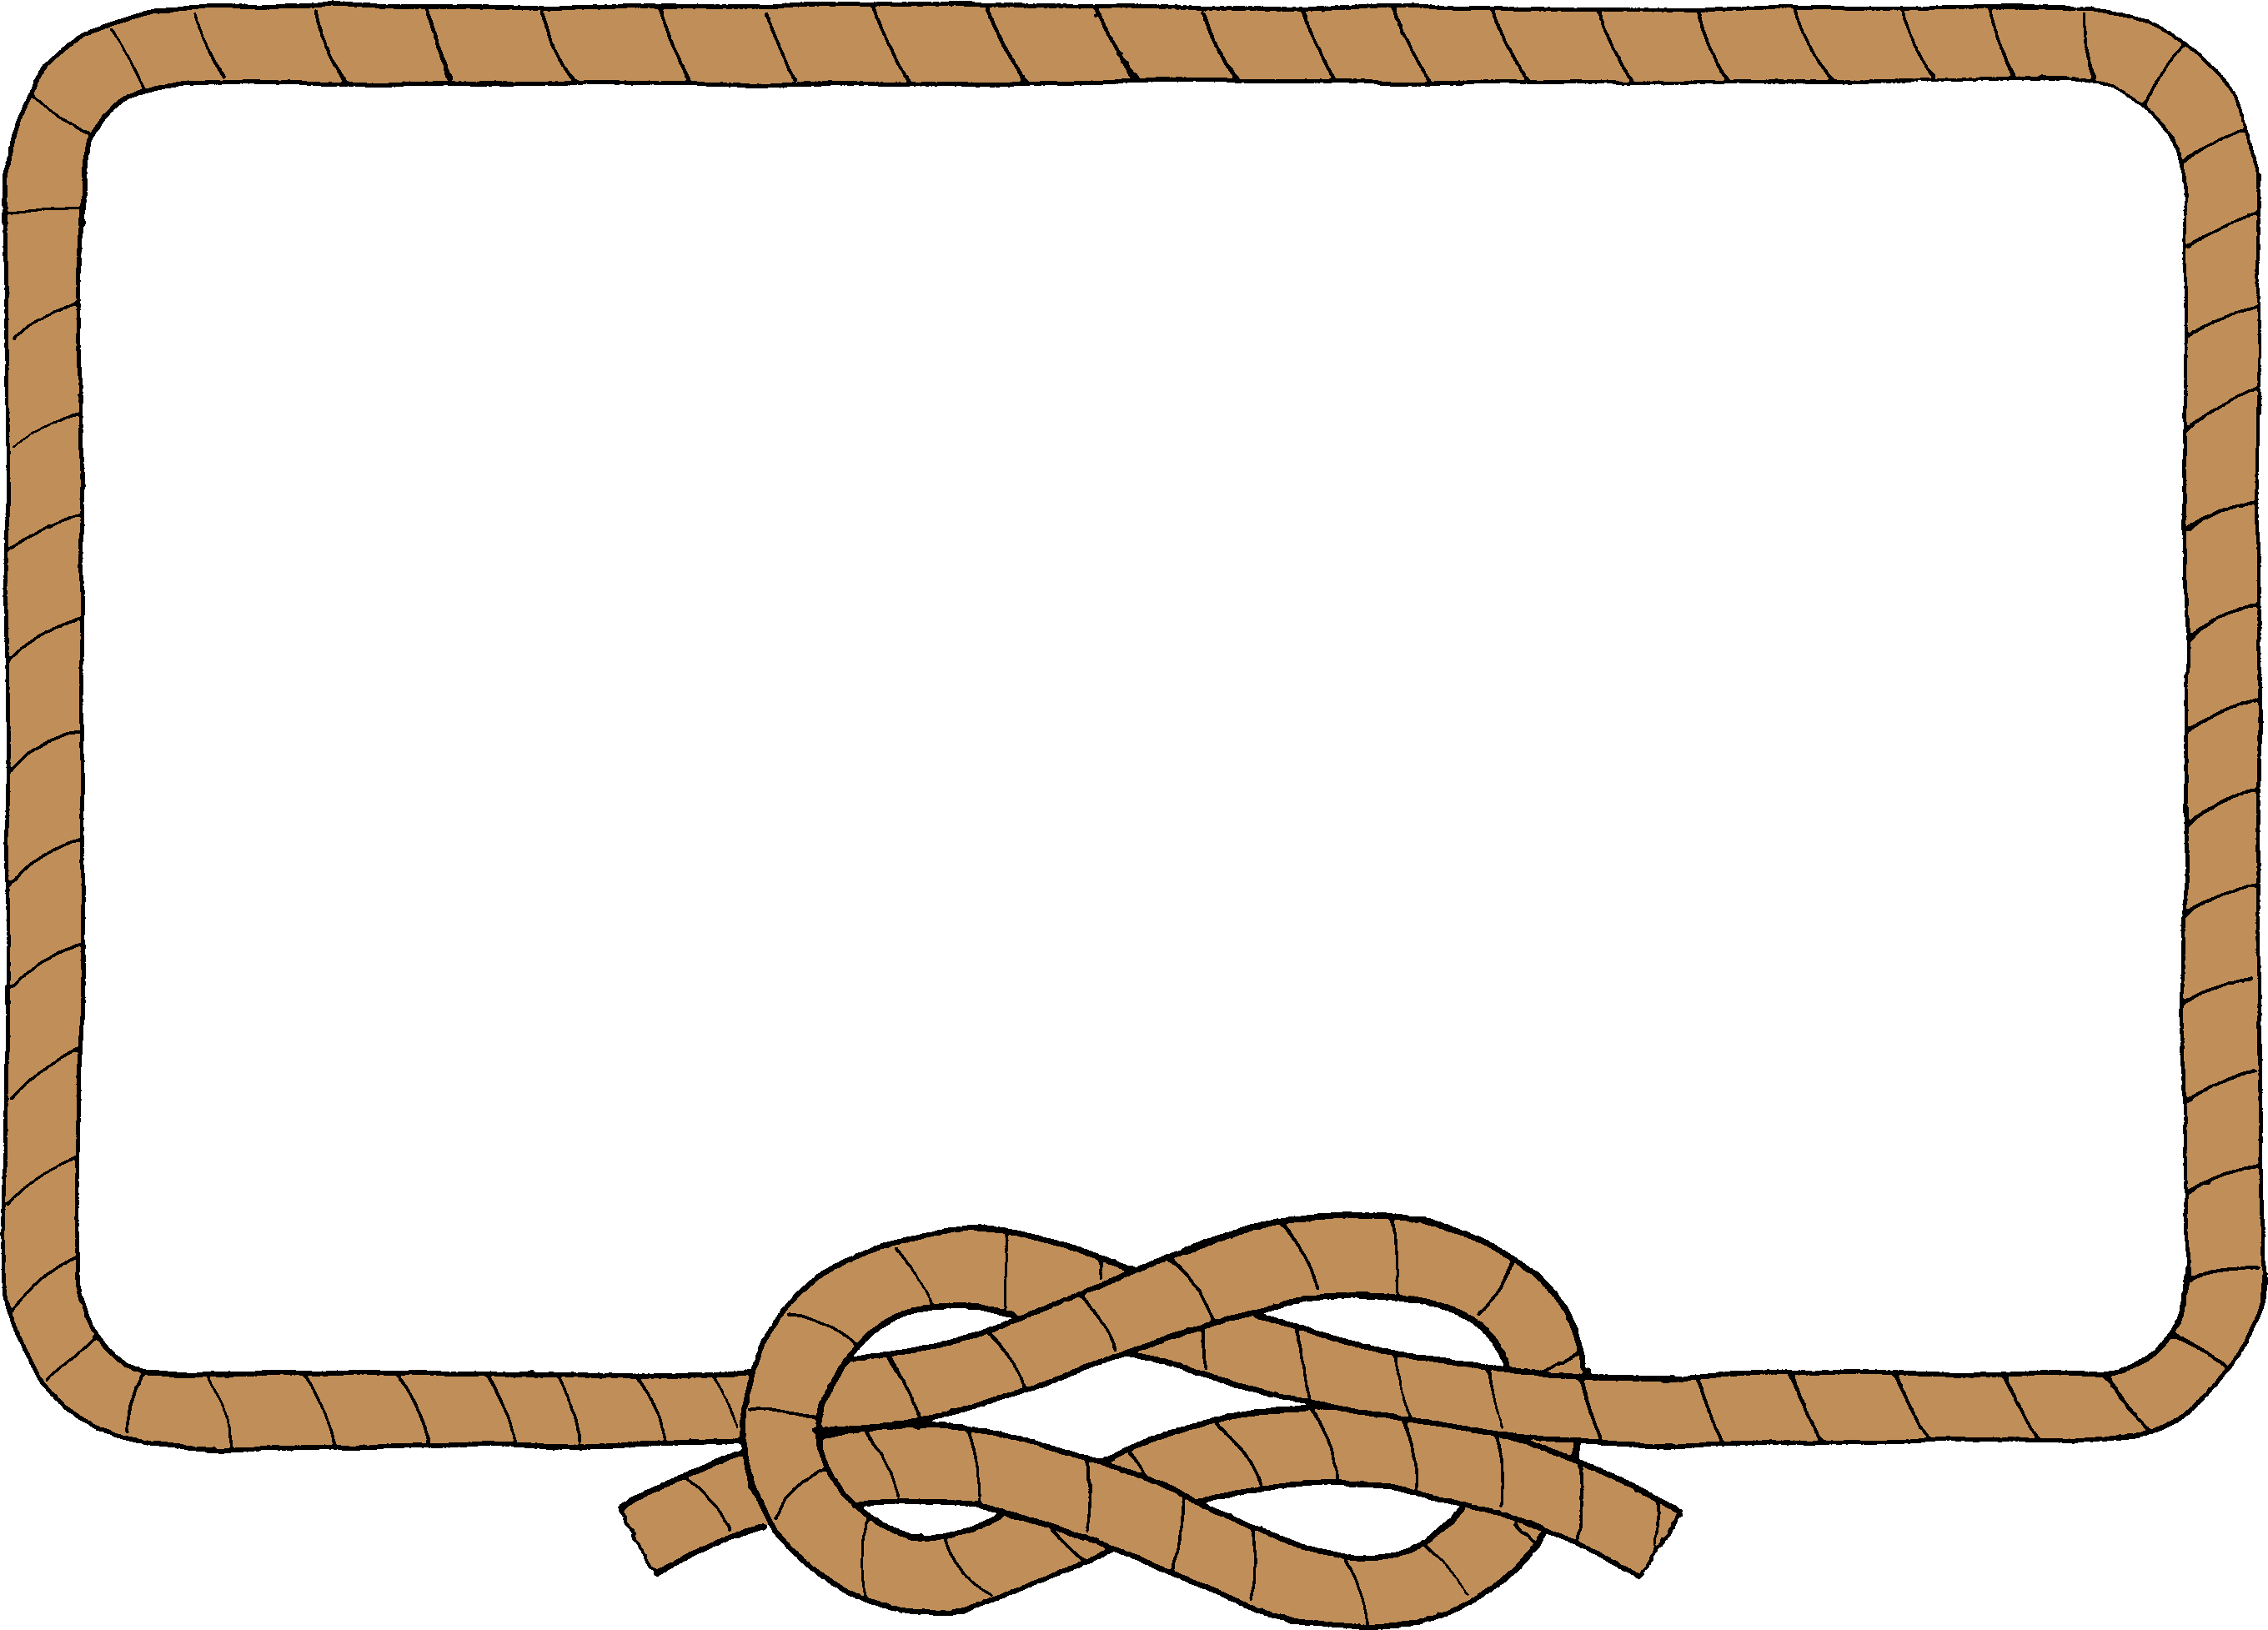 Clipart Usscouts Org Library Odds And Ends Miscellaneous Rope Border